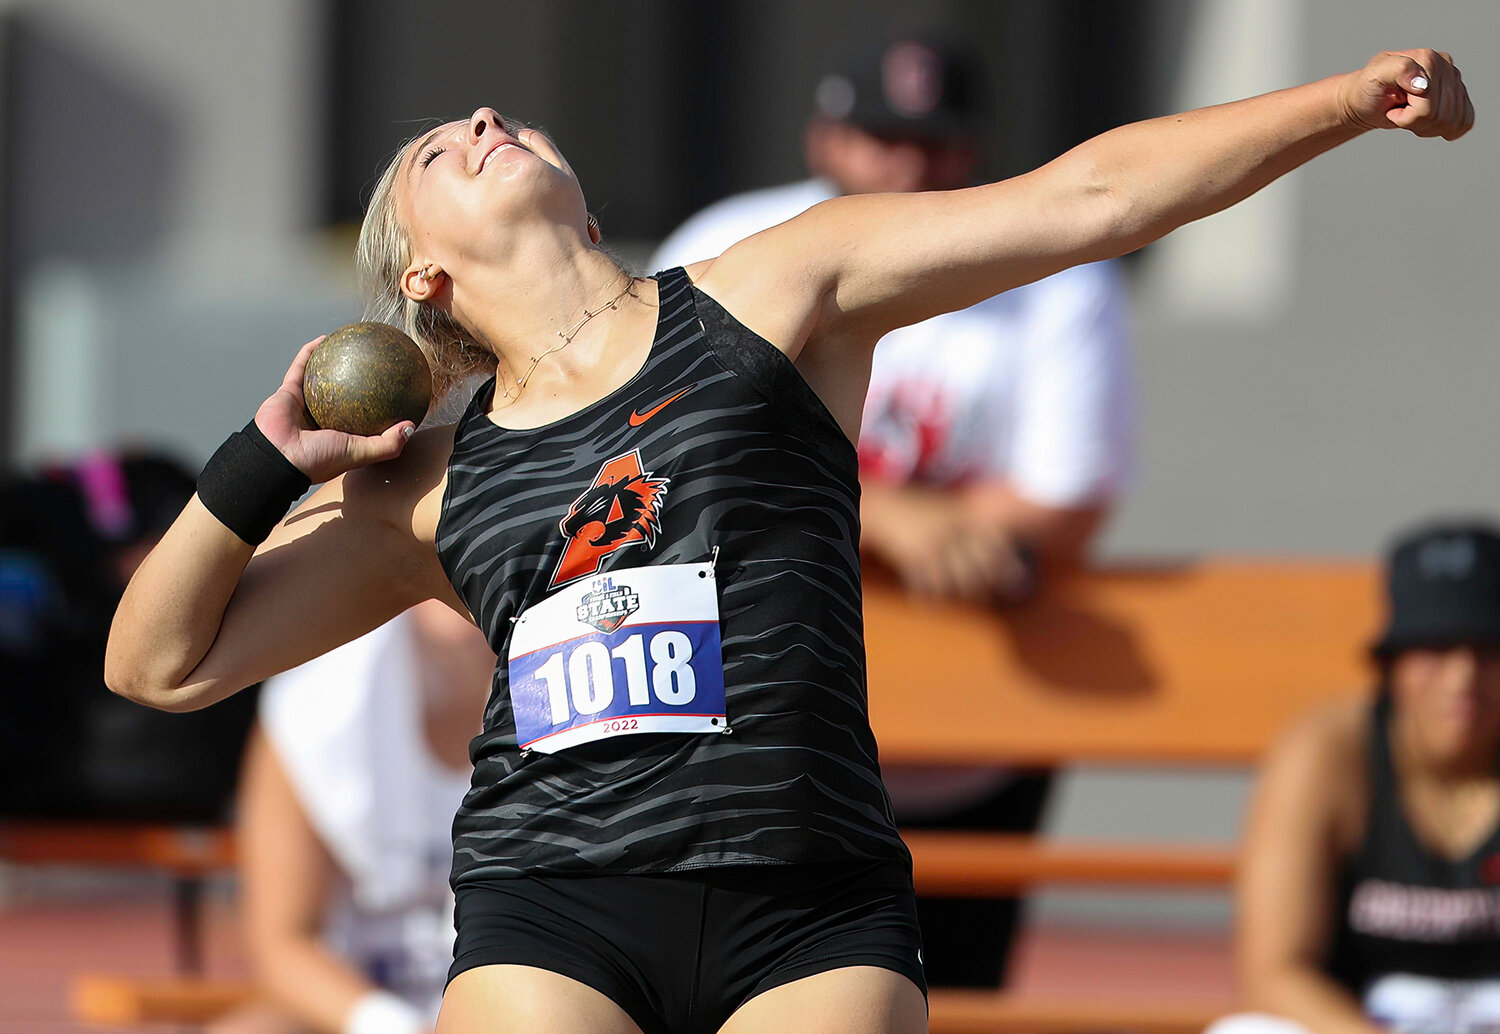 Lauren St. Peters of Aledo High School competes in the Class 5A girls shot put event at the UIL State Track and Field Meet on May 13, 2022 in Austin, Texas.